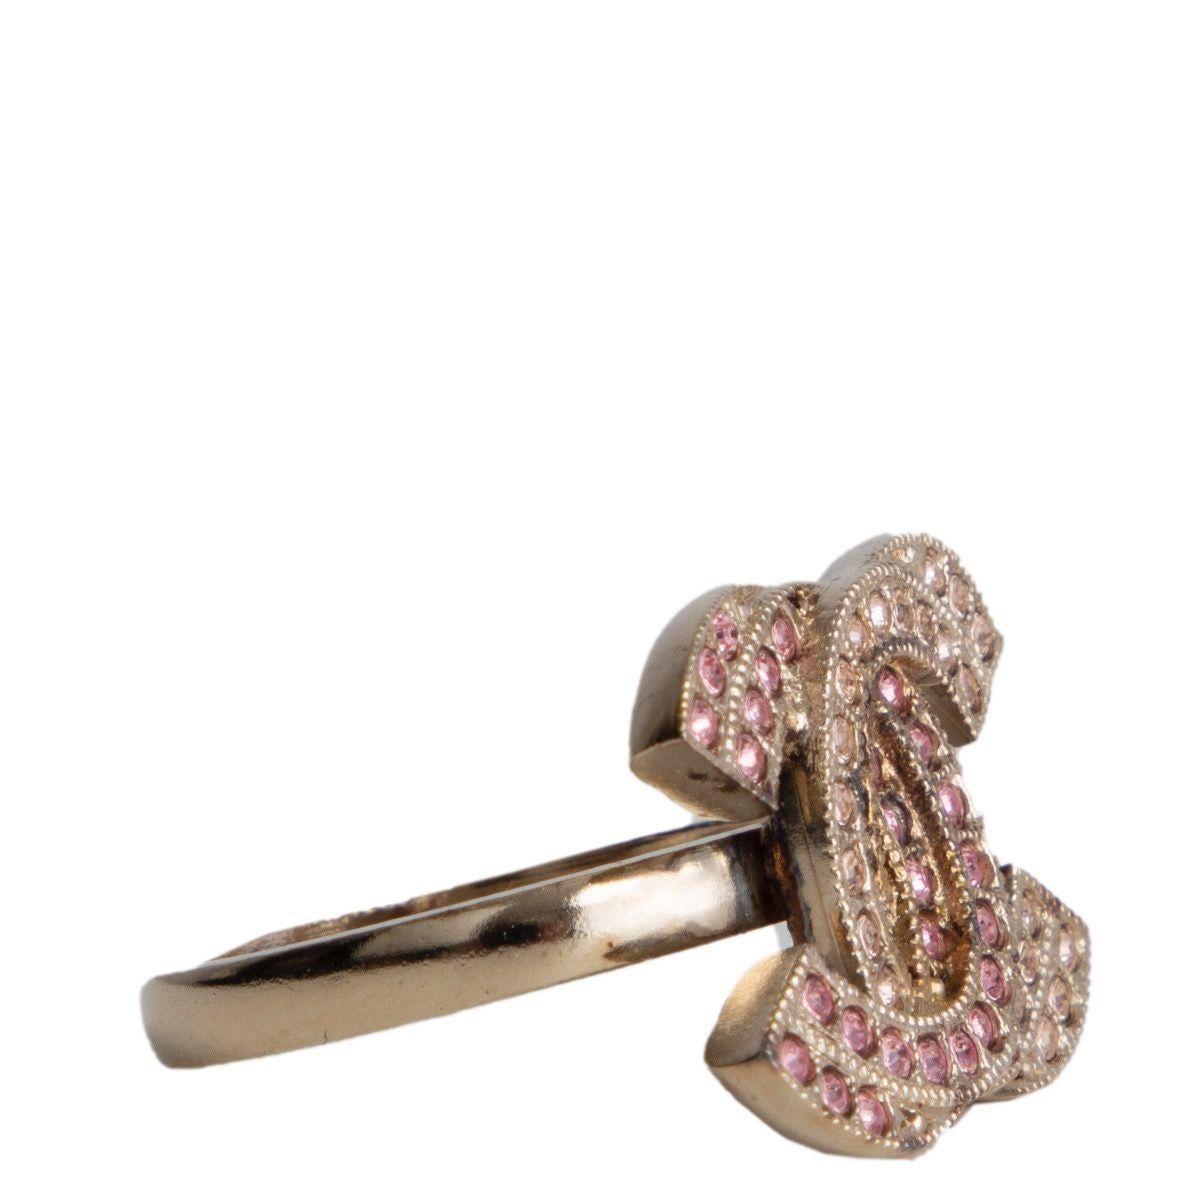 Chanel 'CC' light gold-tone ring with light pink and pink crystal embellished 'CC'. Has been worn and is in excllent condition. Comes with dust bag.

Size 7
Width 2cm (0.8in)
Height 1.5cm (0.6in)
Hardware Light Gold-Tone Plated Silver